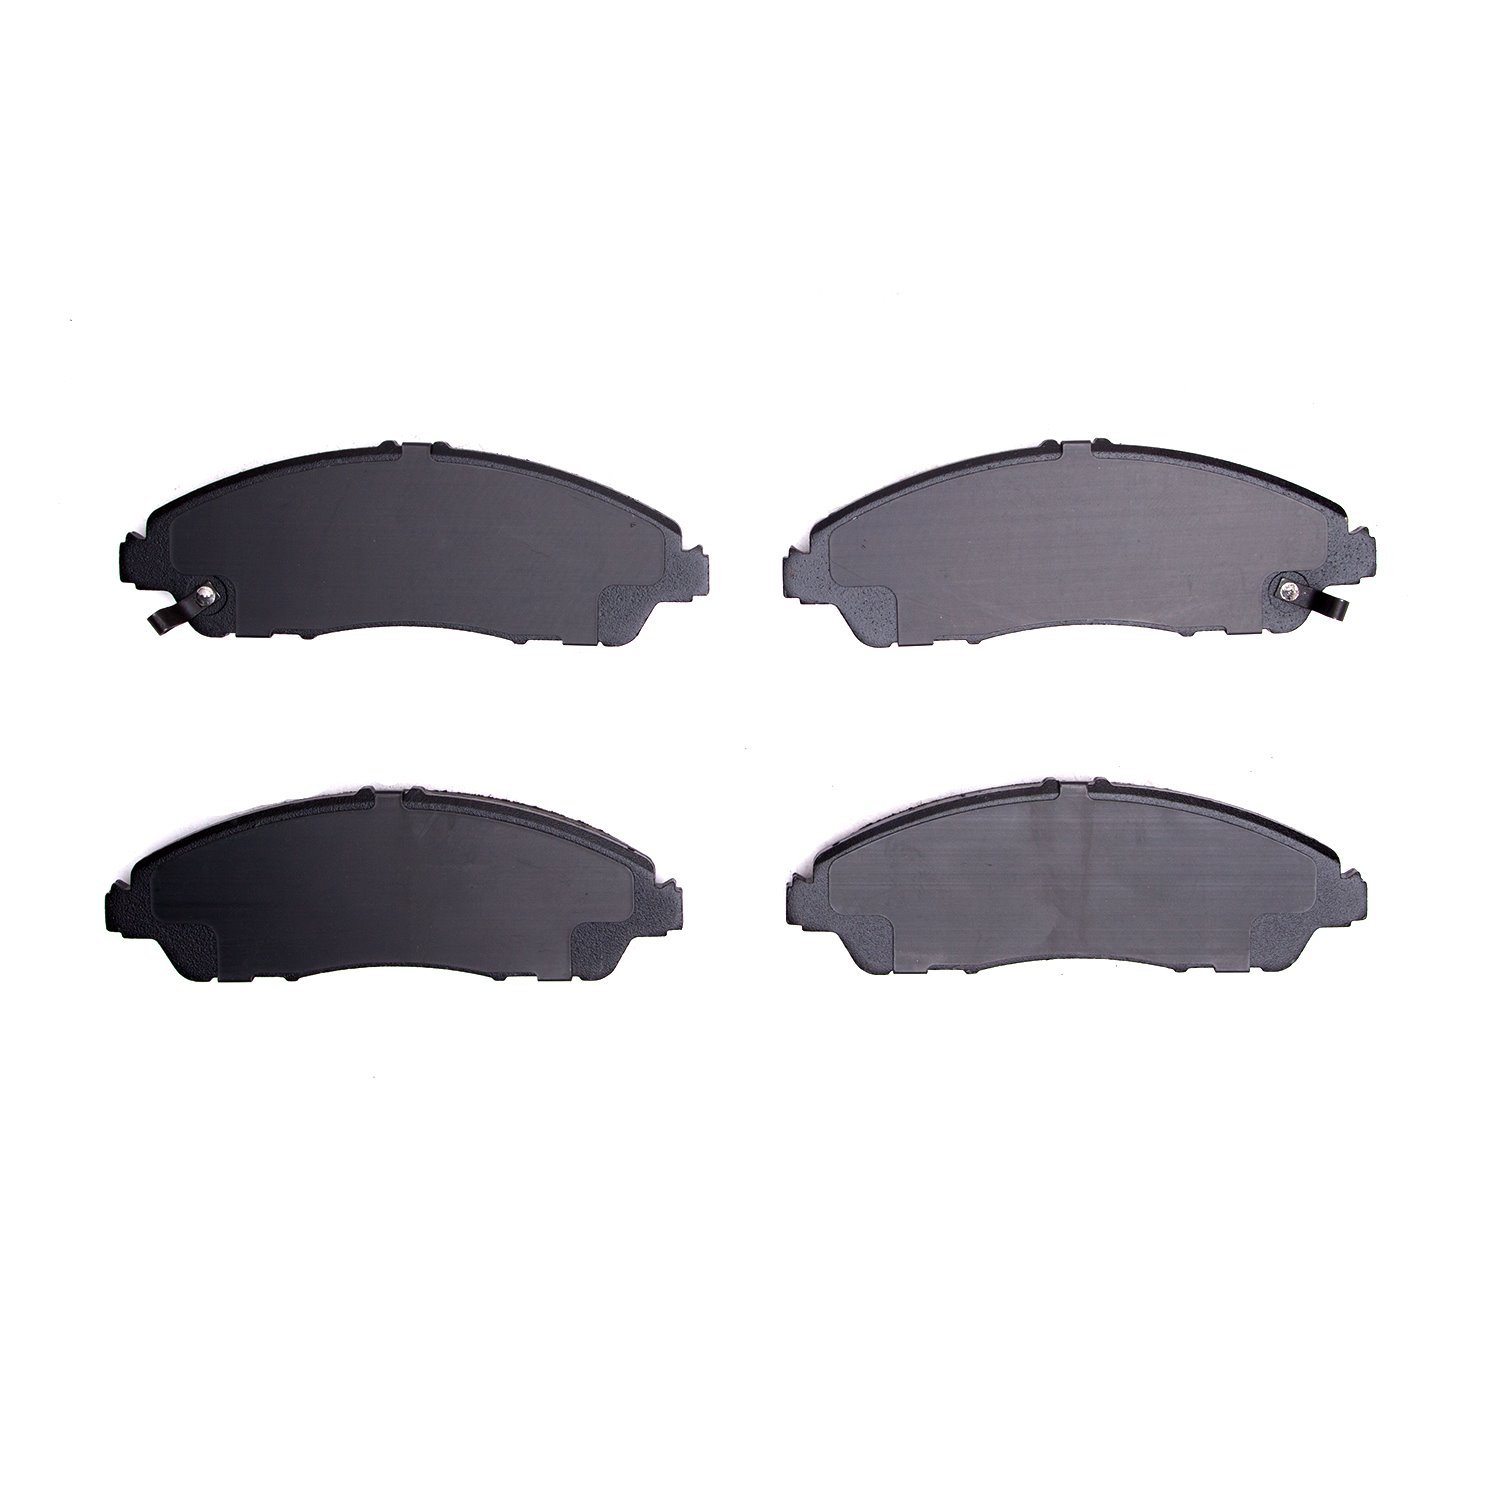 1551-1723-00 5000 Advanced Ceramic Brake Pads, Fits Select Acura/Honda, Position: Front